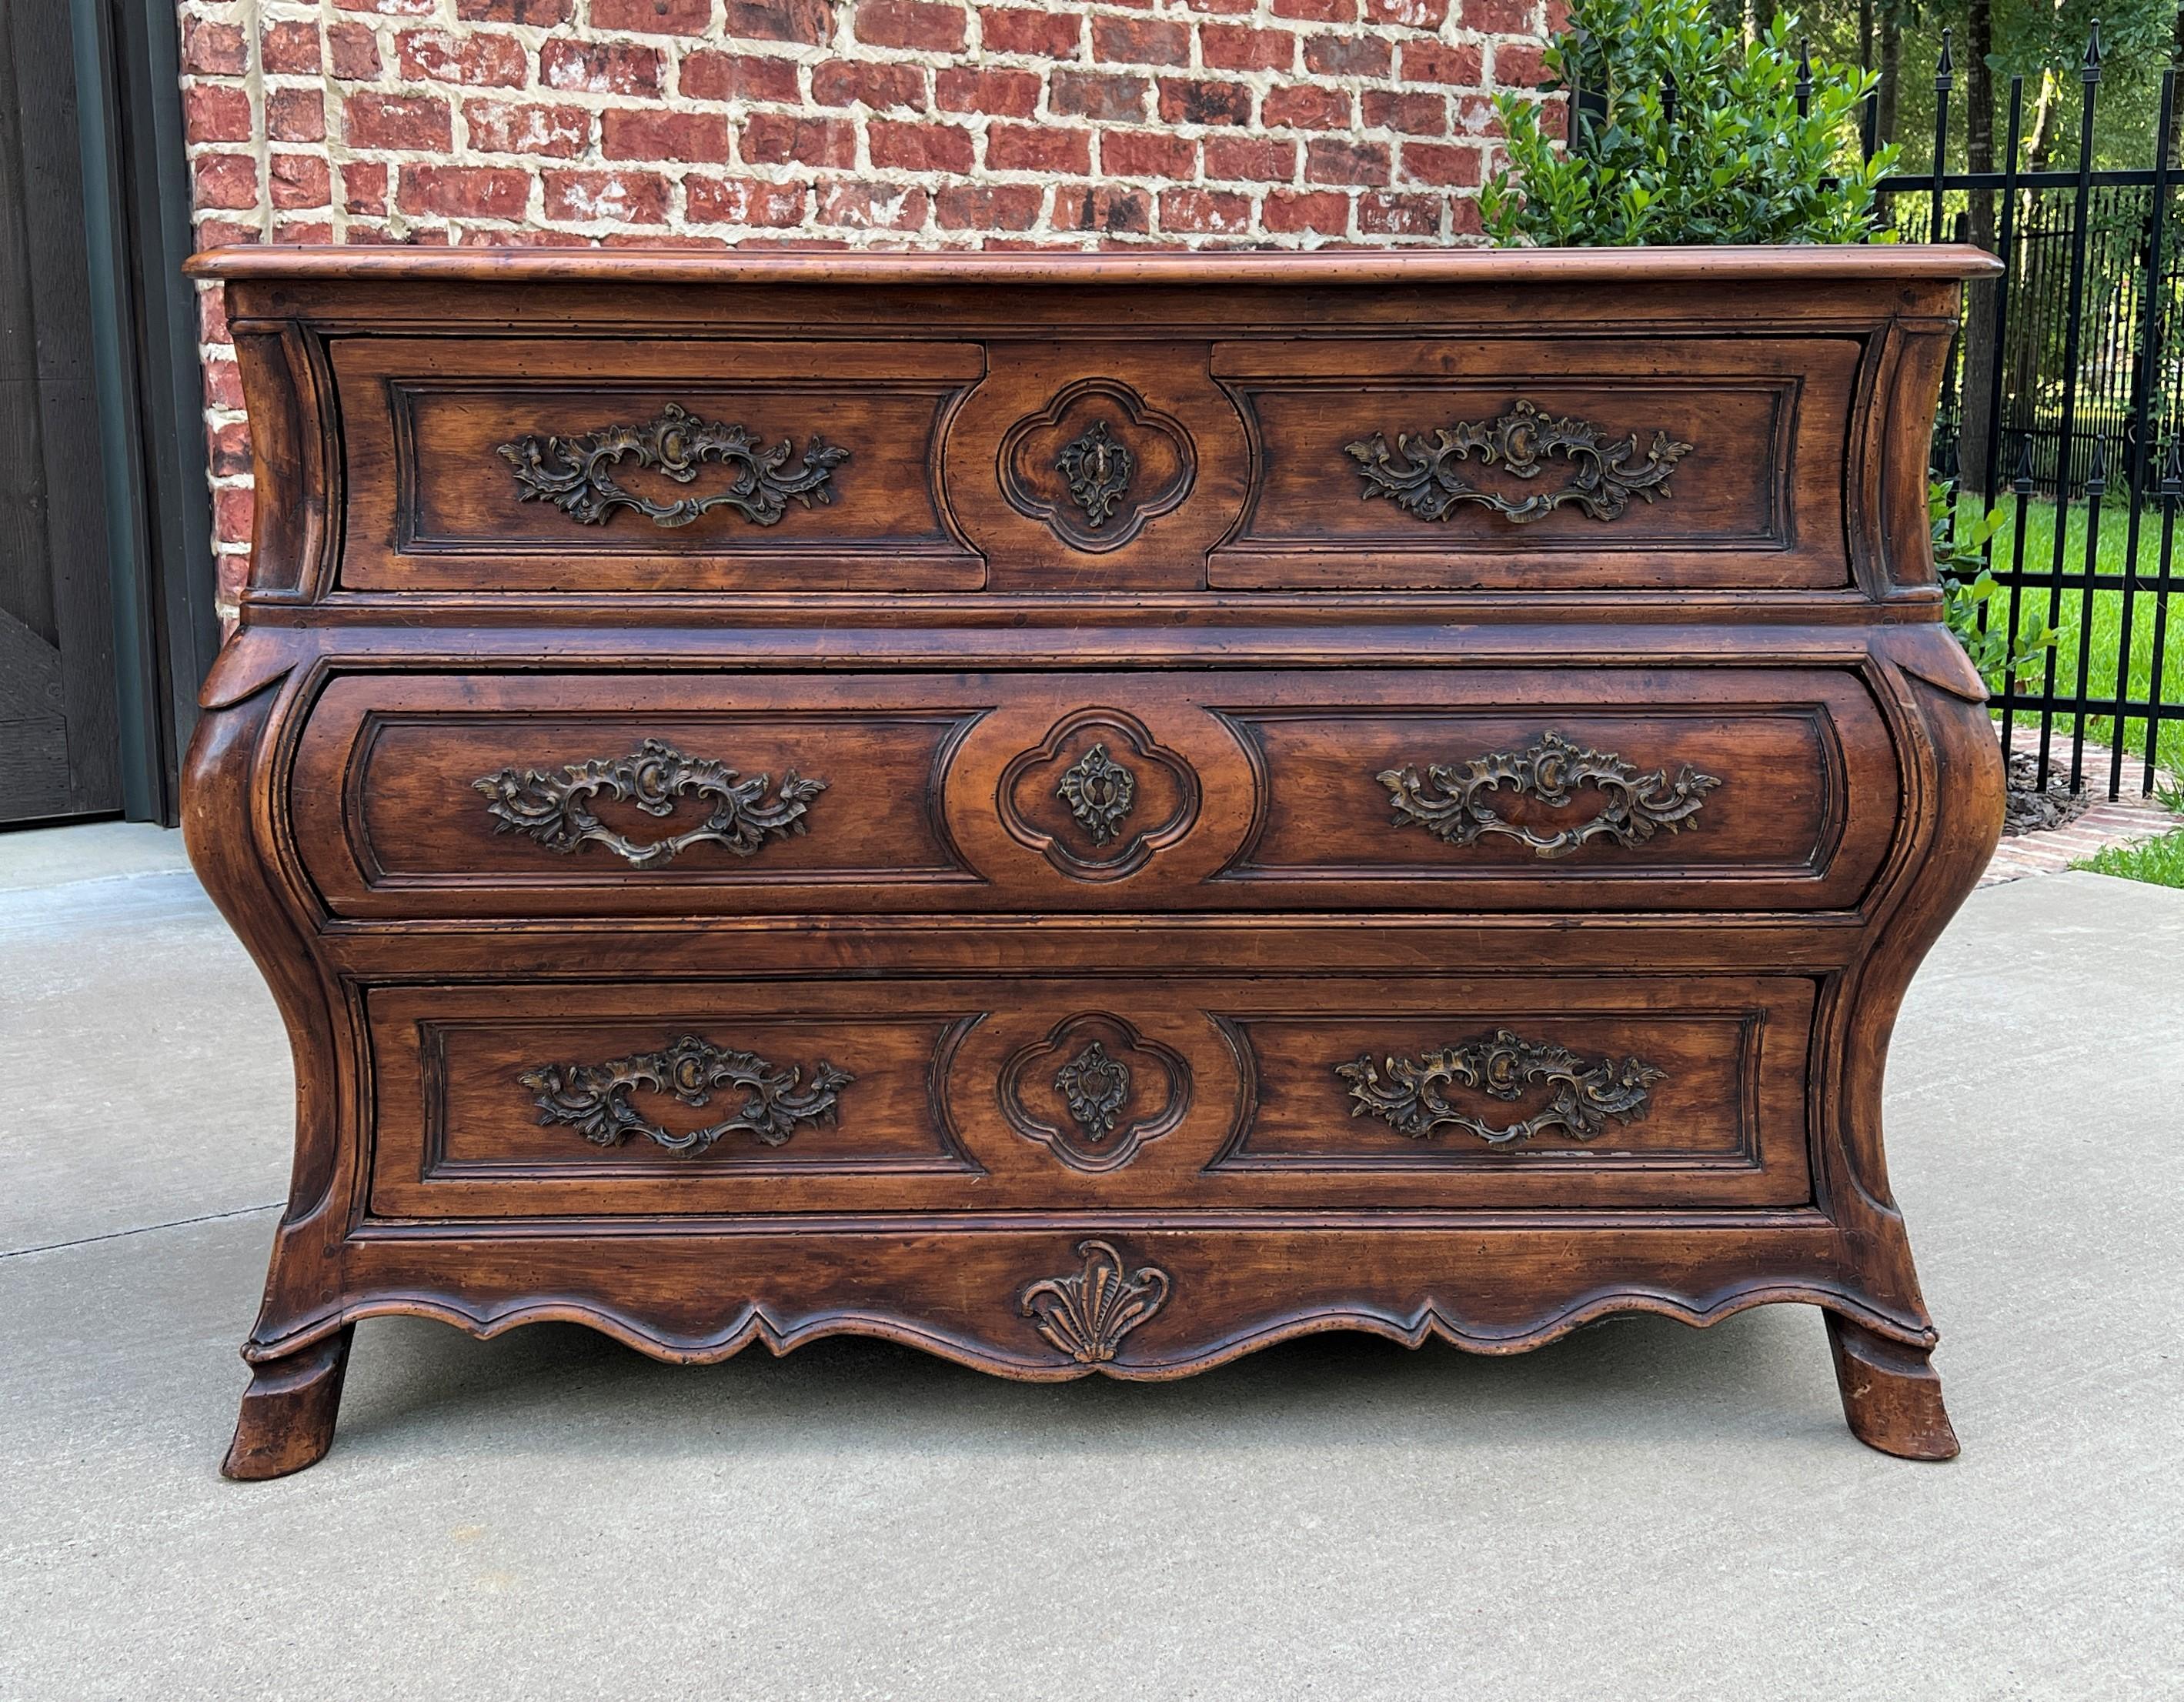 Exquisite Antique French Walnut Louis XV Style Bombe chest of drawers or Commode~~Early/Mid 19th Century

This is a SUPERB example of an antique French walnut bombe style chest of drawers or commode with hoof feet~~highly carved with serpentine